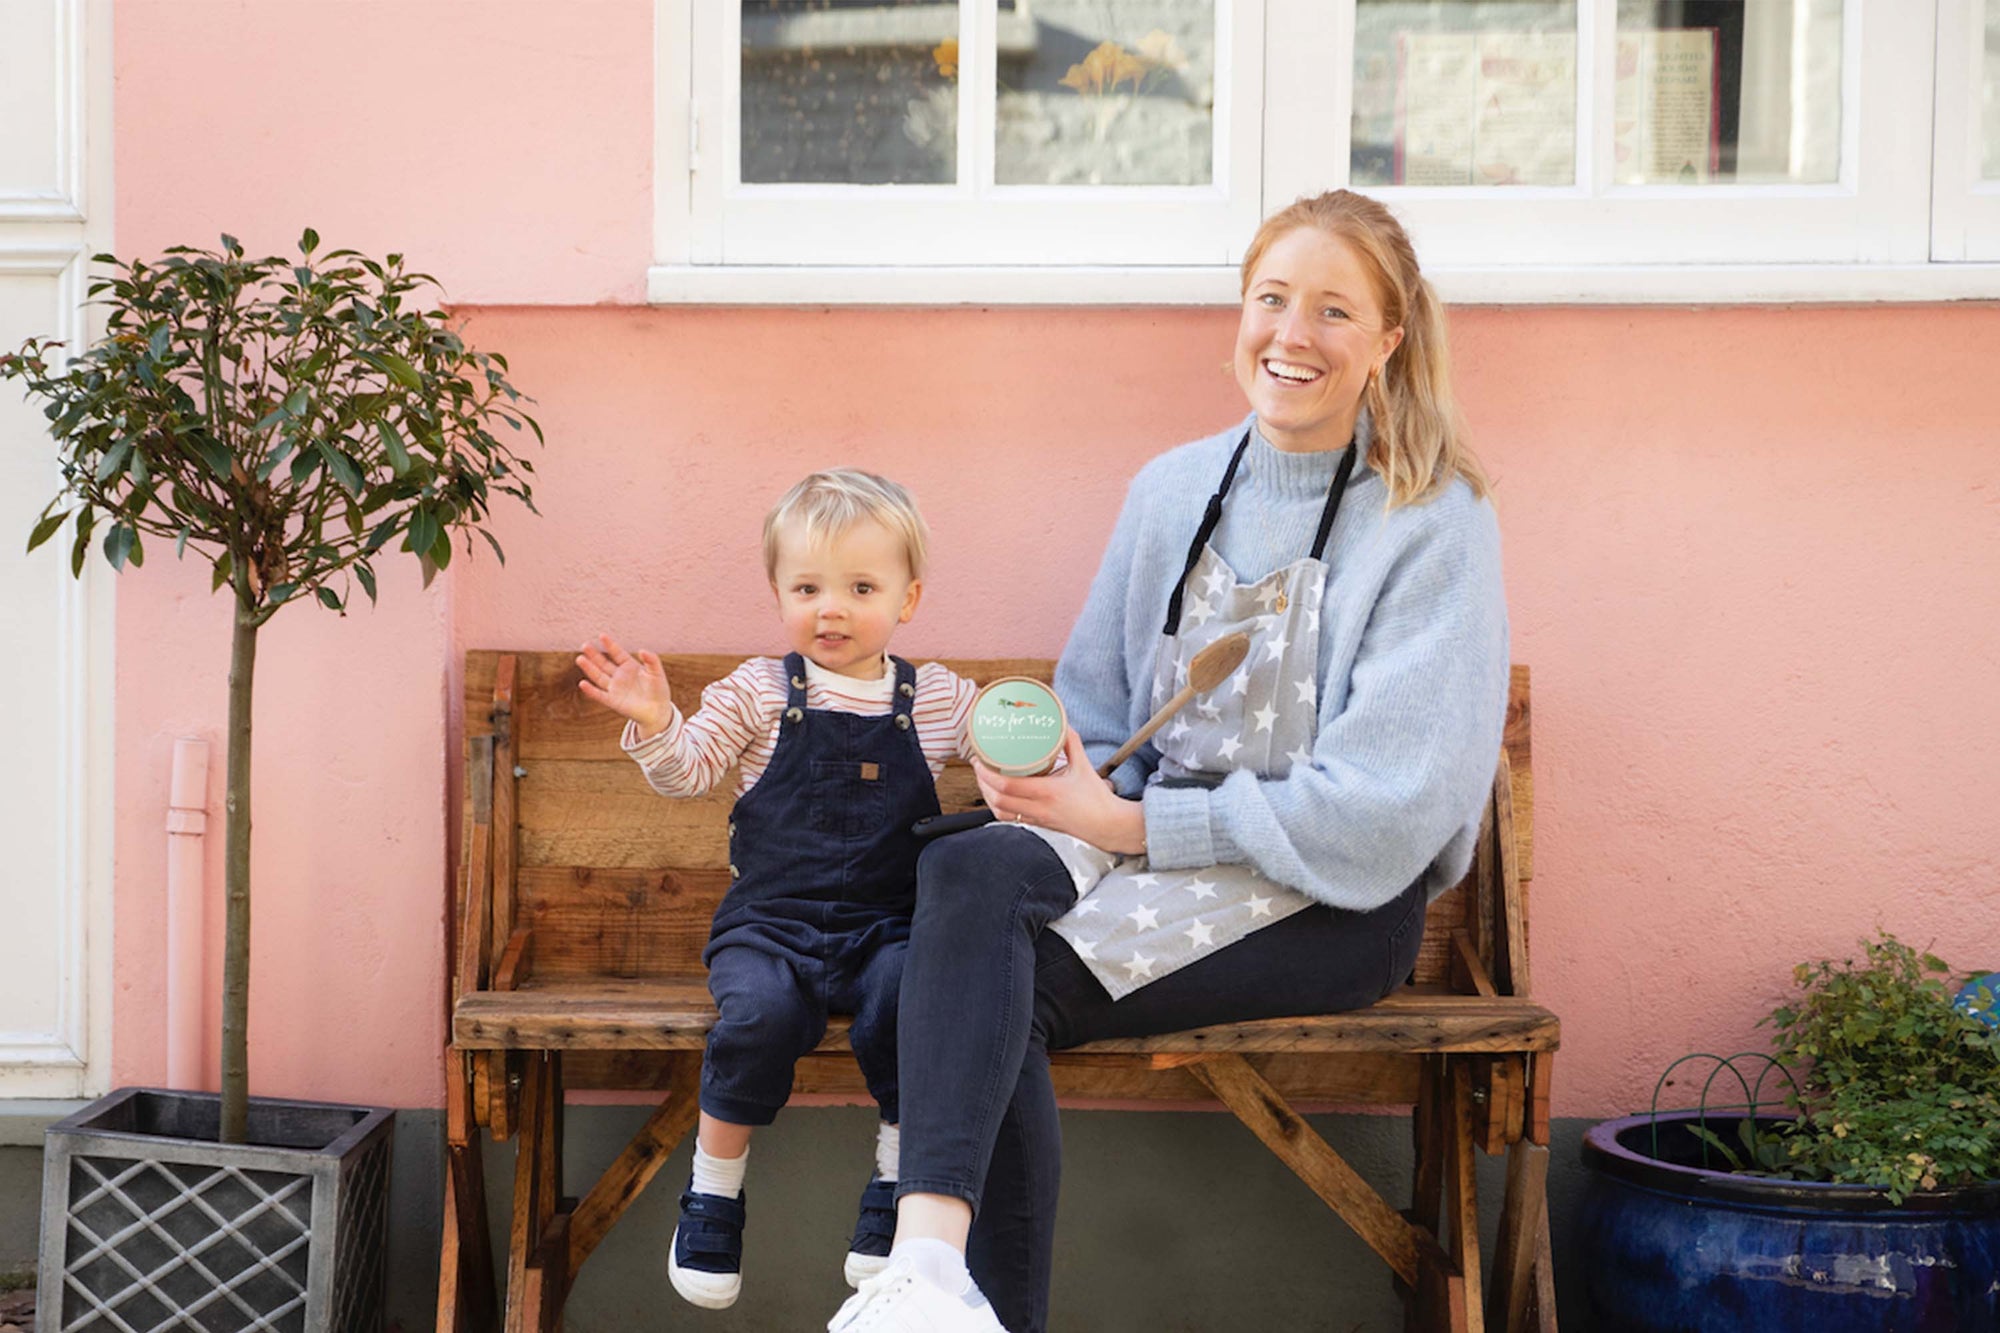 Five Questions with: Flora - Founder of Baby Food Delivery Service Pots for Tots